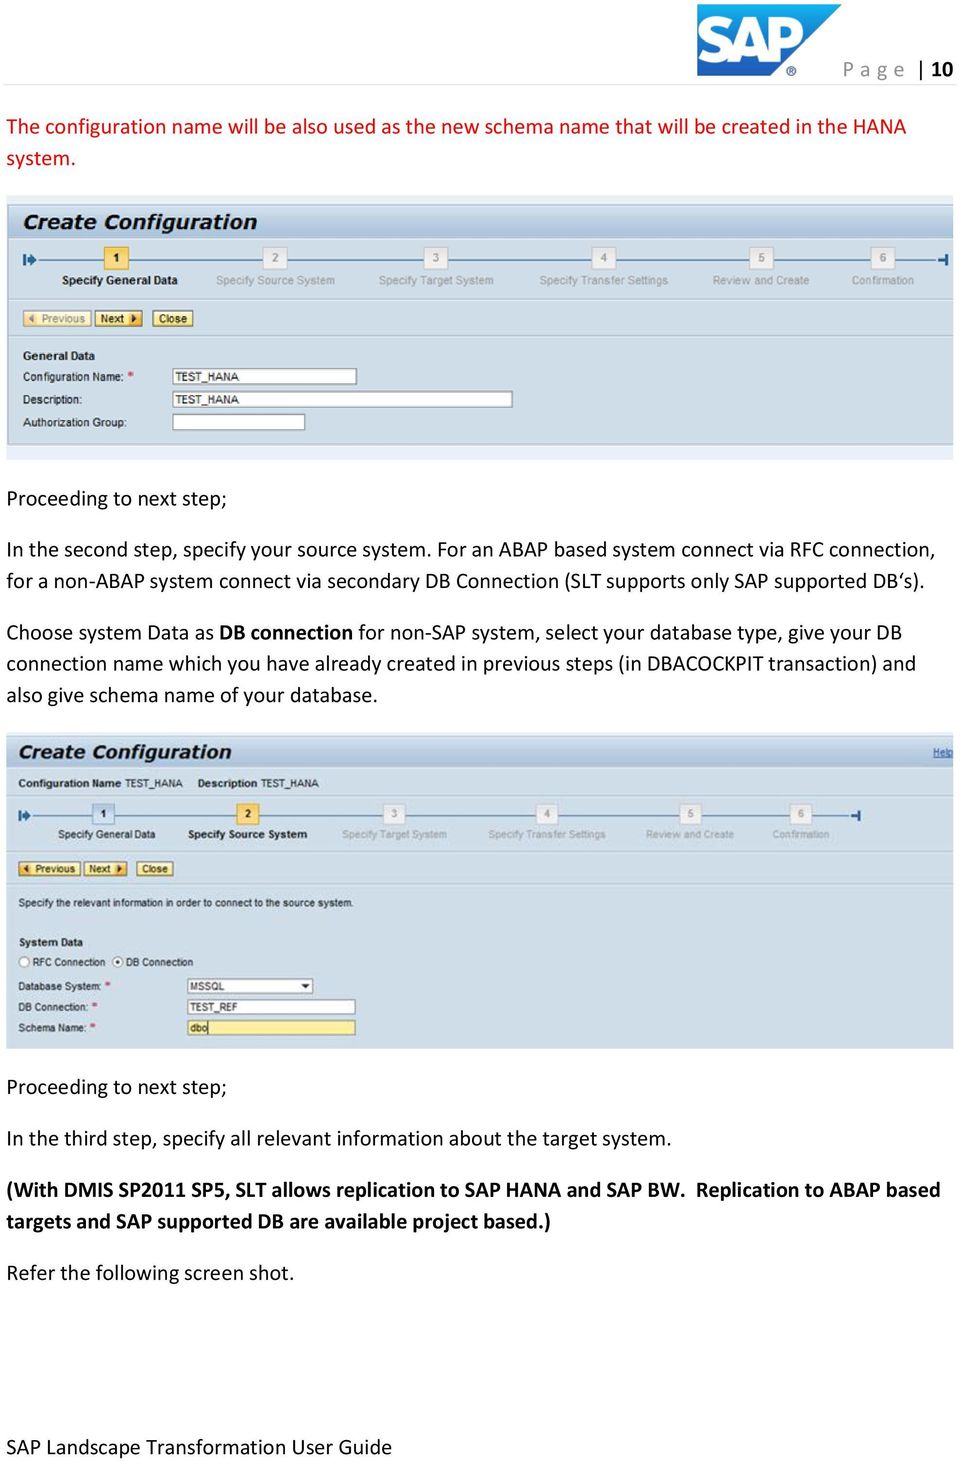 Choose system Data as DB connection for non-sap system, select your database type, give your DB connection name which you have already created in previous steps (in DBACOCKPIT transaction) and also